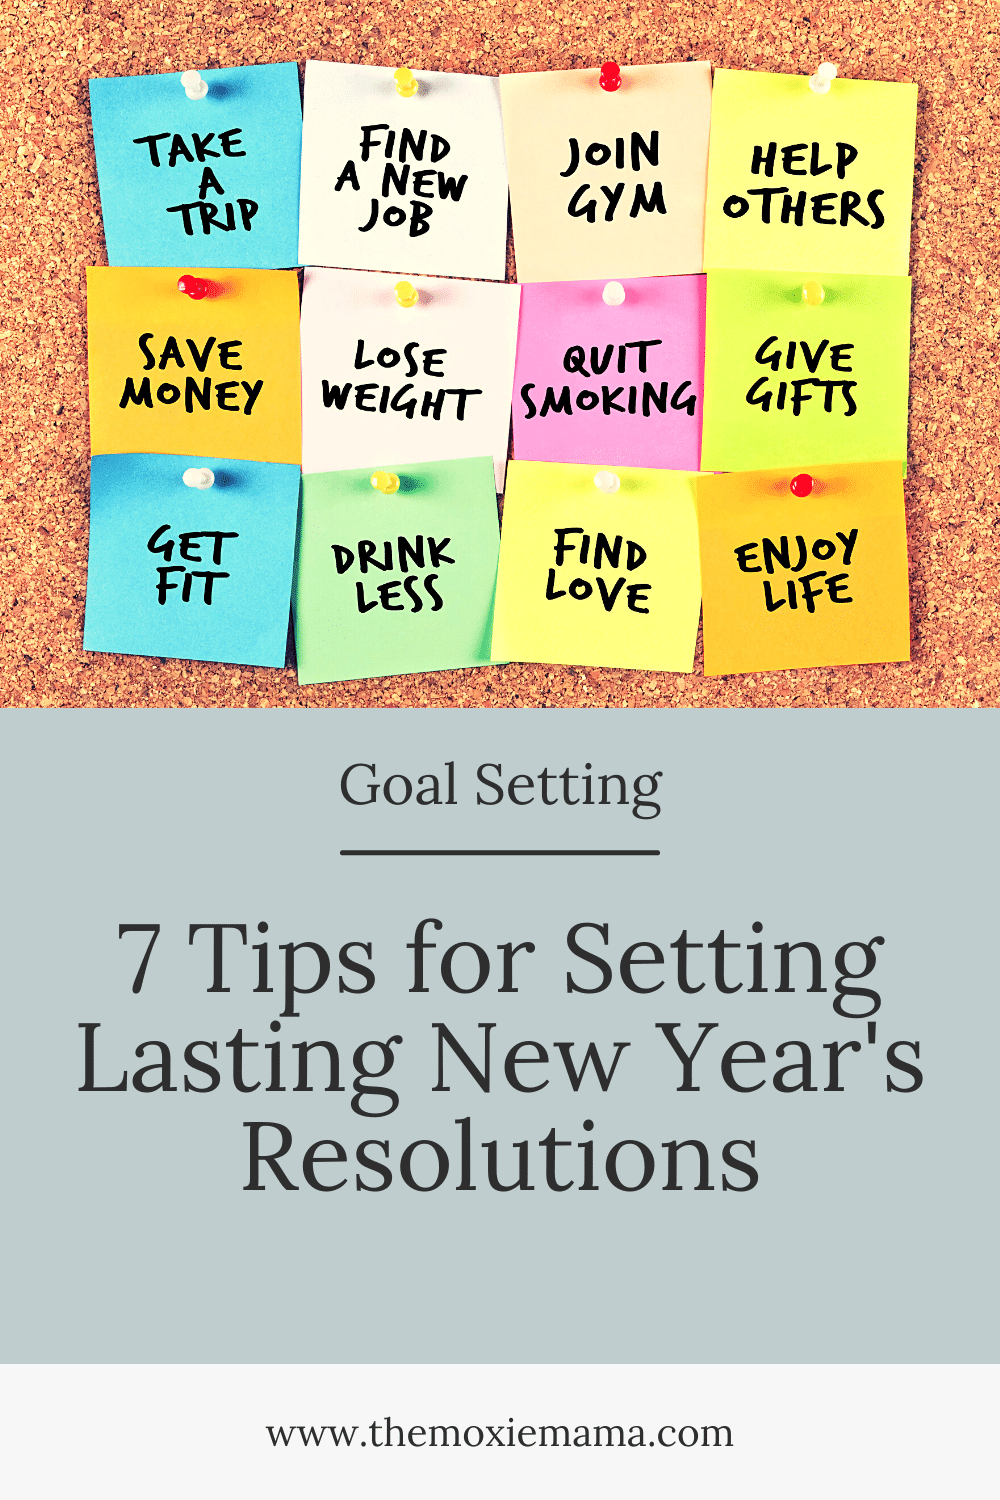 Fitness Experts Share Tips for Keeping New Year's Resolutions